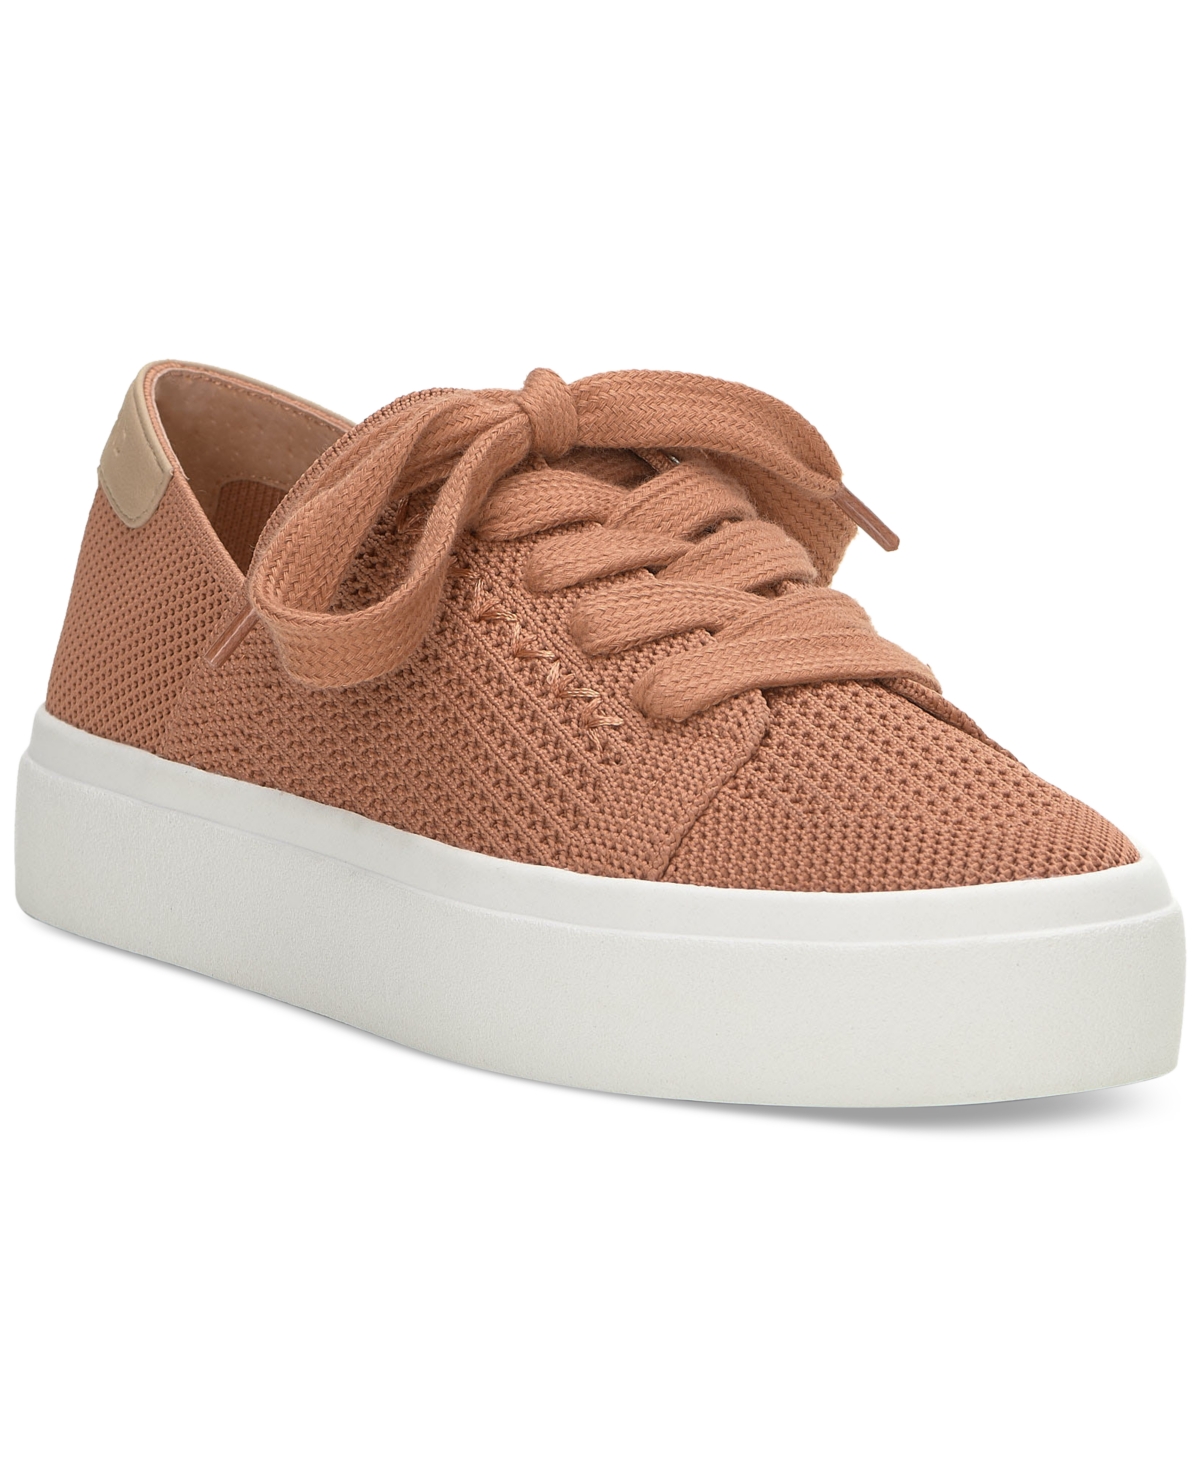 LUCKY BRAND WOMEN'S TALENA KNIT LACE-UP SNEAKERS